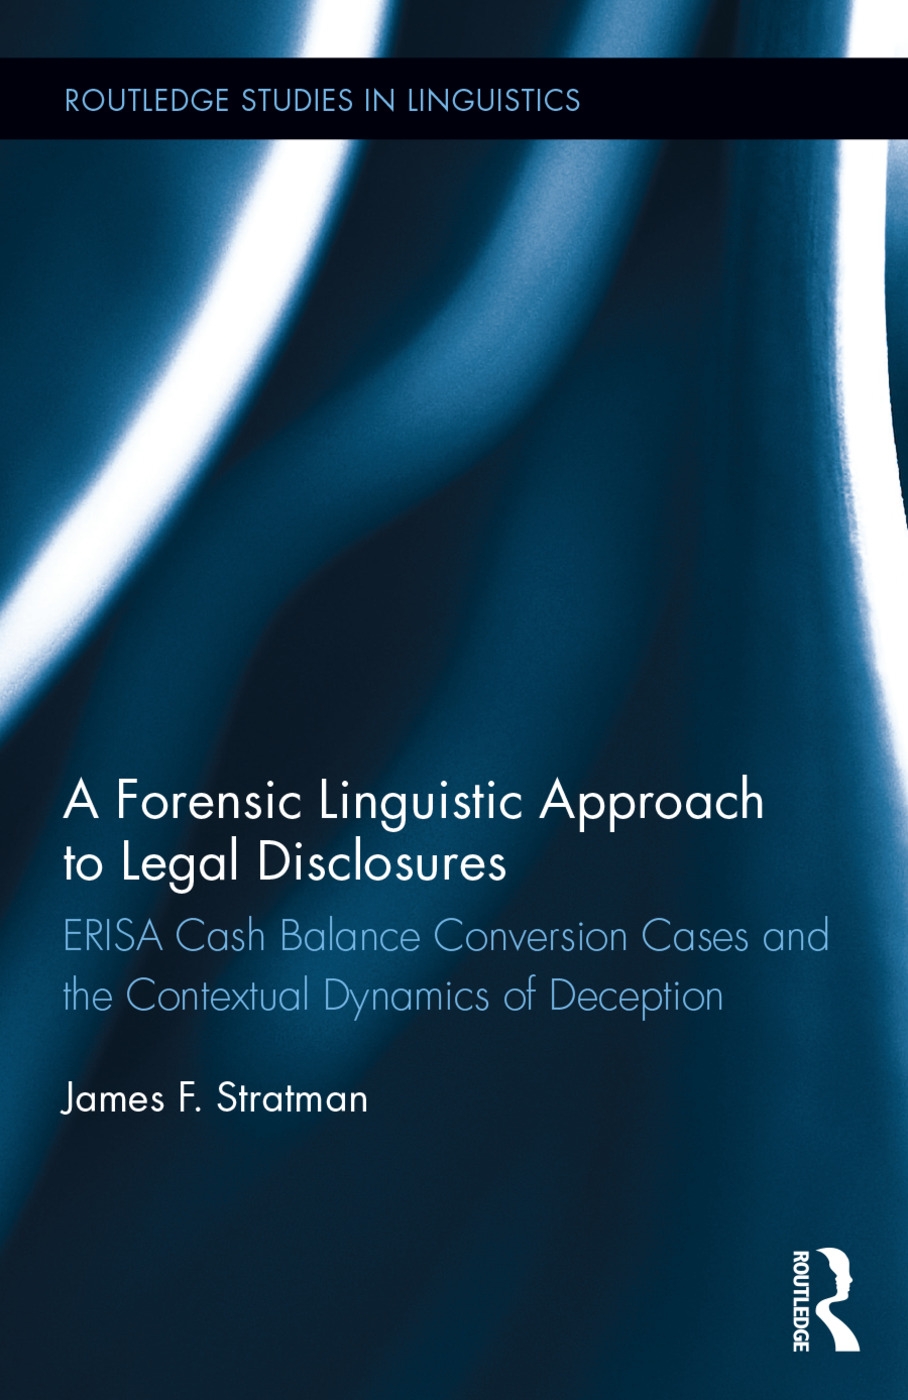 A Forensic Linguistic Approach to Legal Disclosures: Erisa Cash Balance Conversion Cases and the Contextual Dynamics of Deception